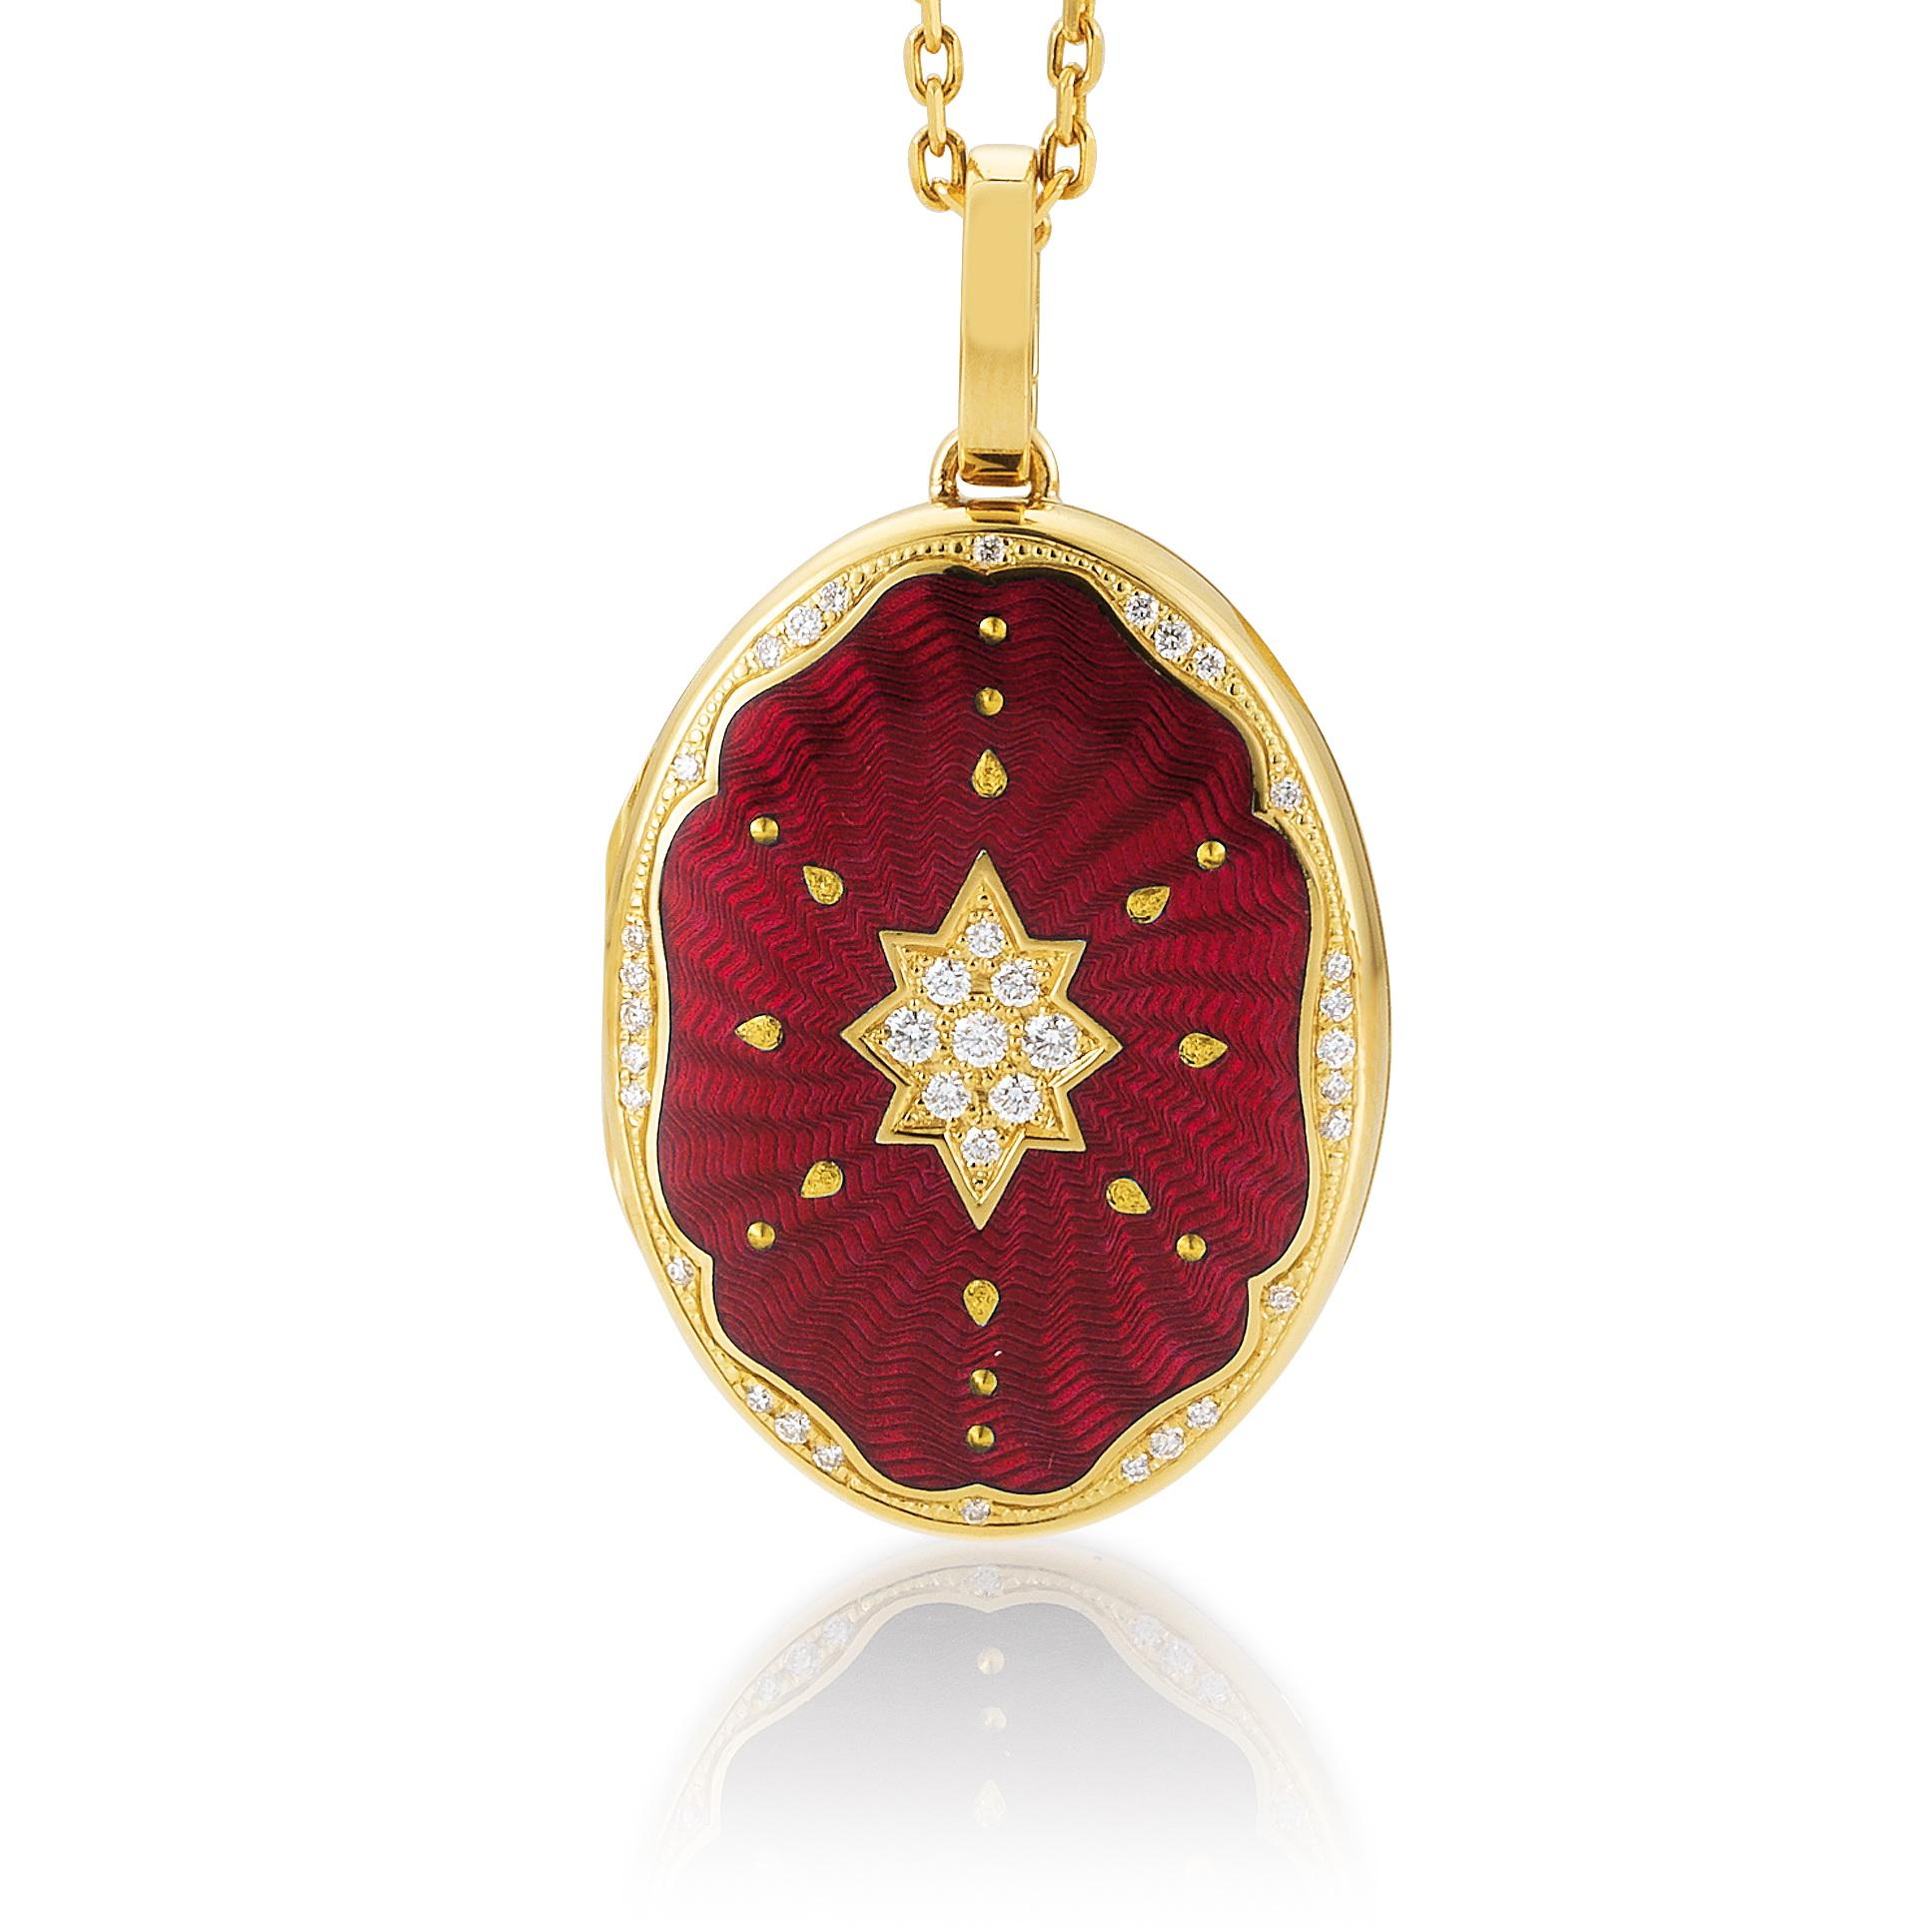 Victor Mayer oval locket pendant necklace 18k yellow gold, Victoria collection, translucent red vitreous enamel, gold paillons, 37 diamonds, total 0.29 ct, G VS, brilliant cut, measurements app. 25 mm x 35 mm

About the creator Victor Mayer
Victor